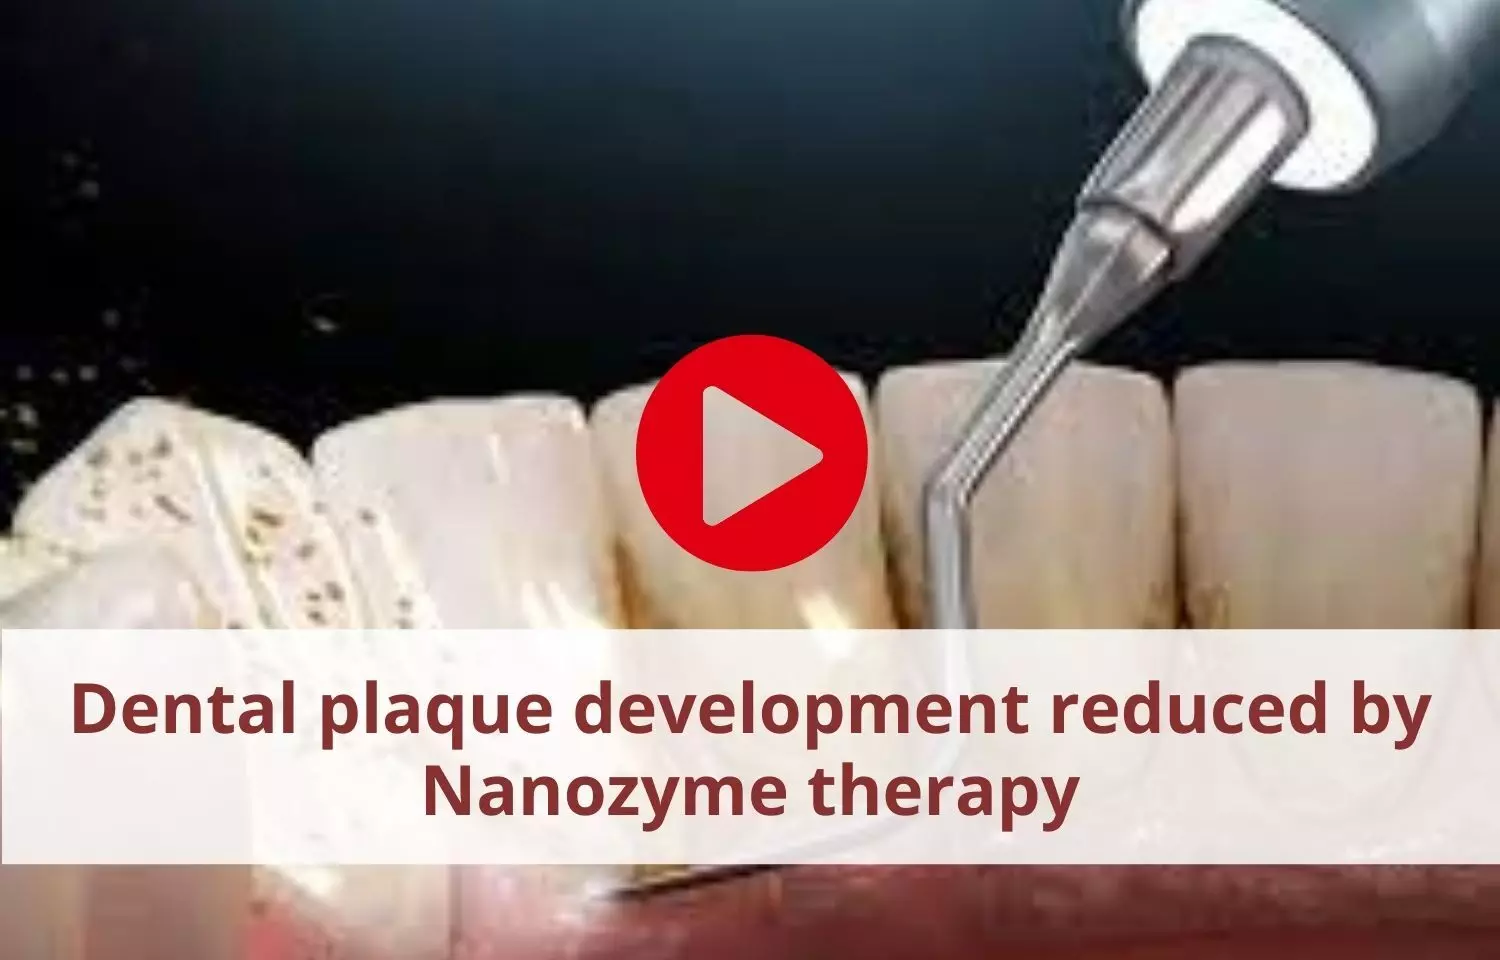 Dental plaque development reduced by Nanozyme therapy